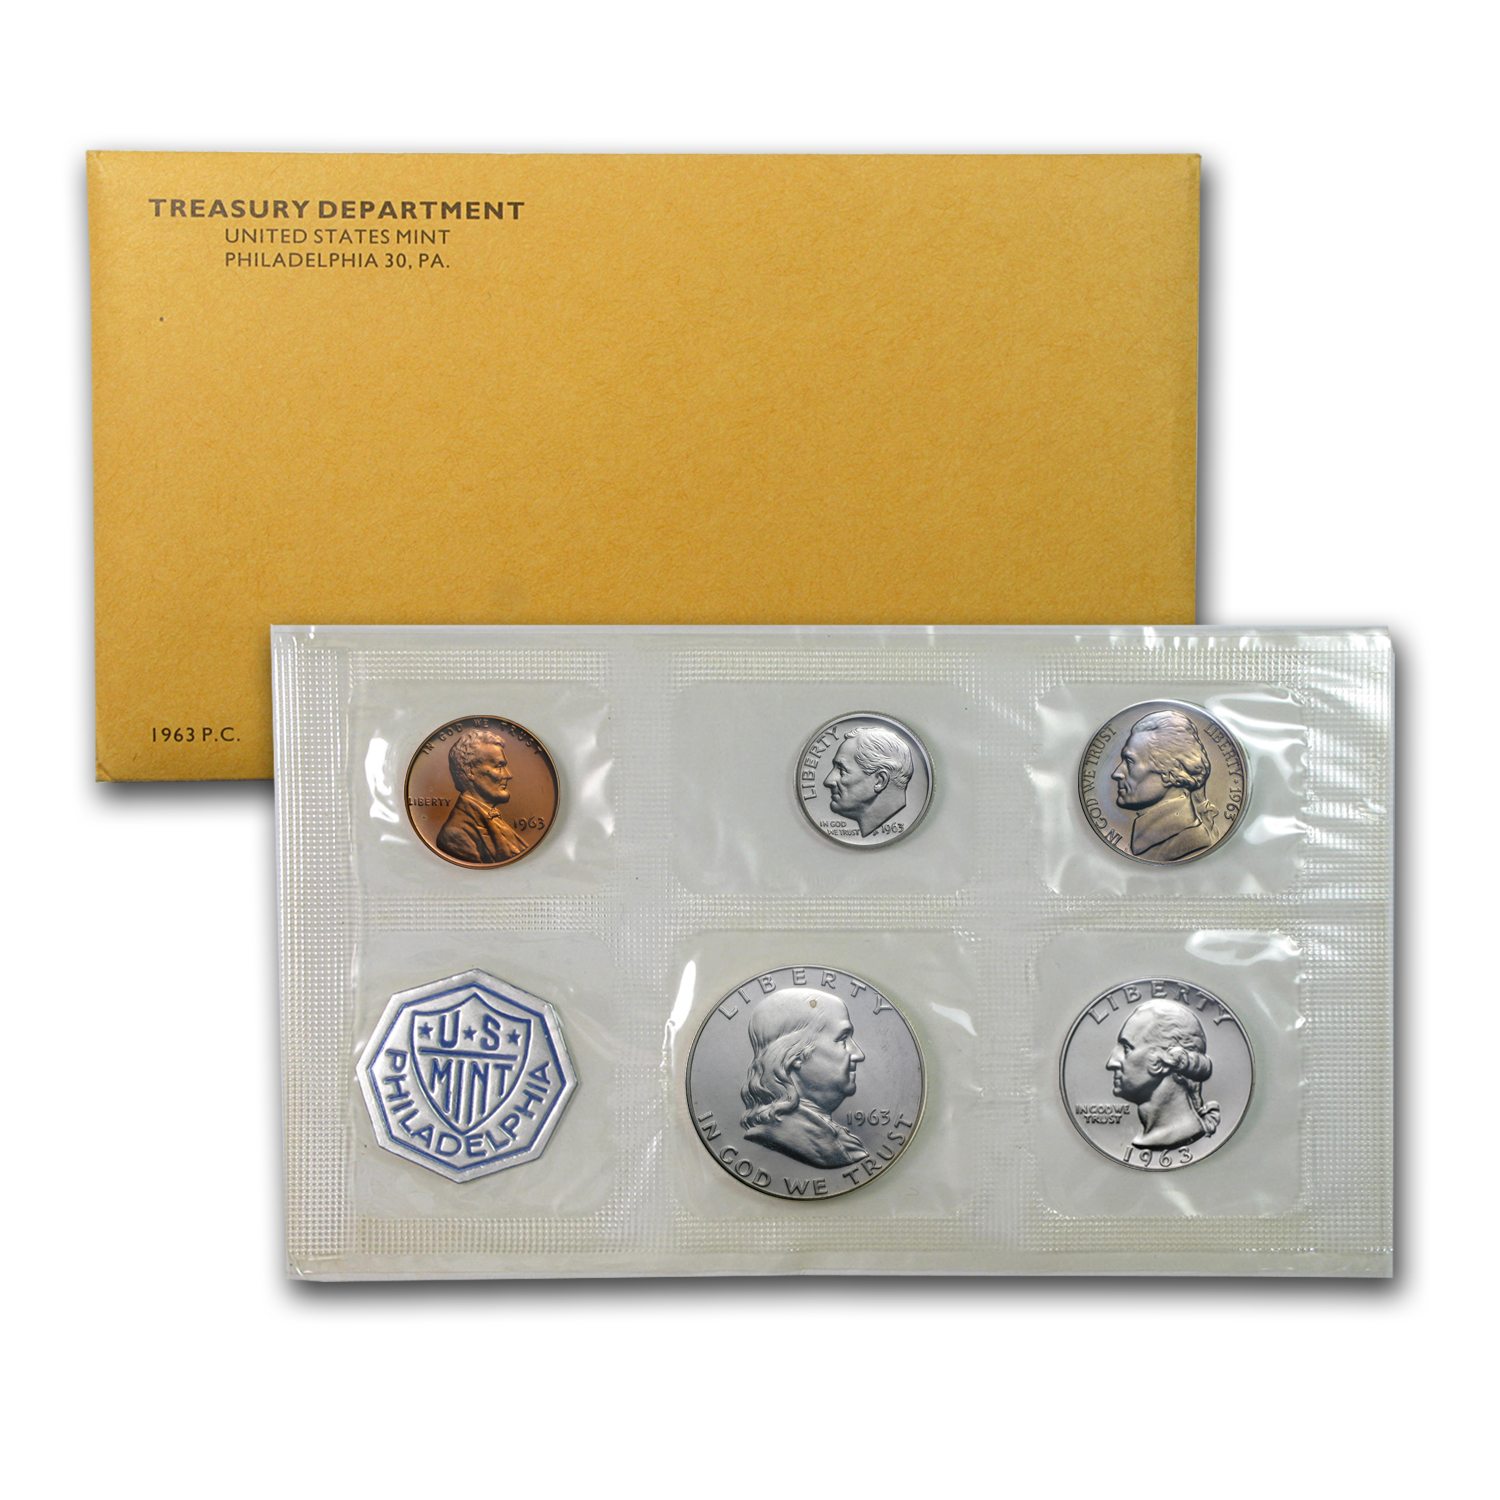 1963 UNITED STATES MINT PROOF SET RARE SEALED ENVELOPE 90% SILVER BIRTH YEAR 